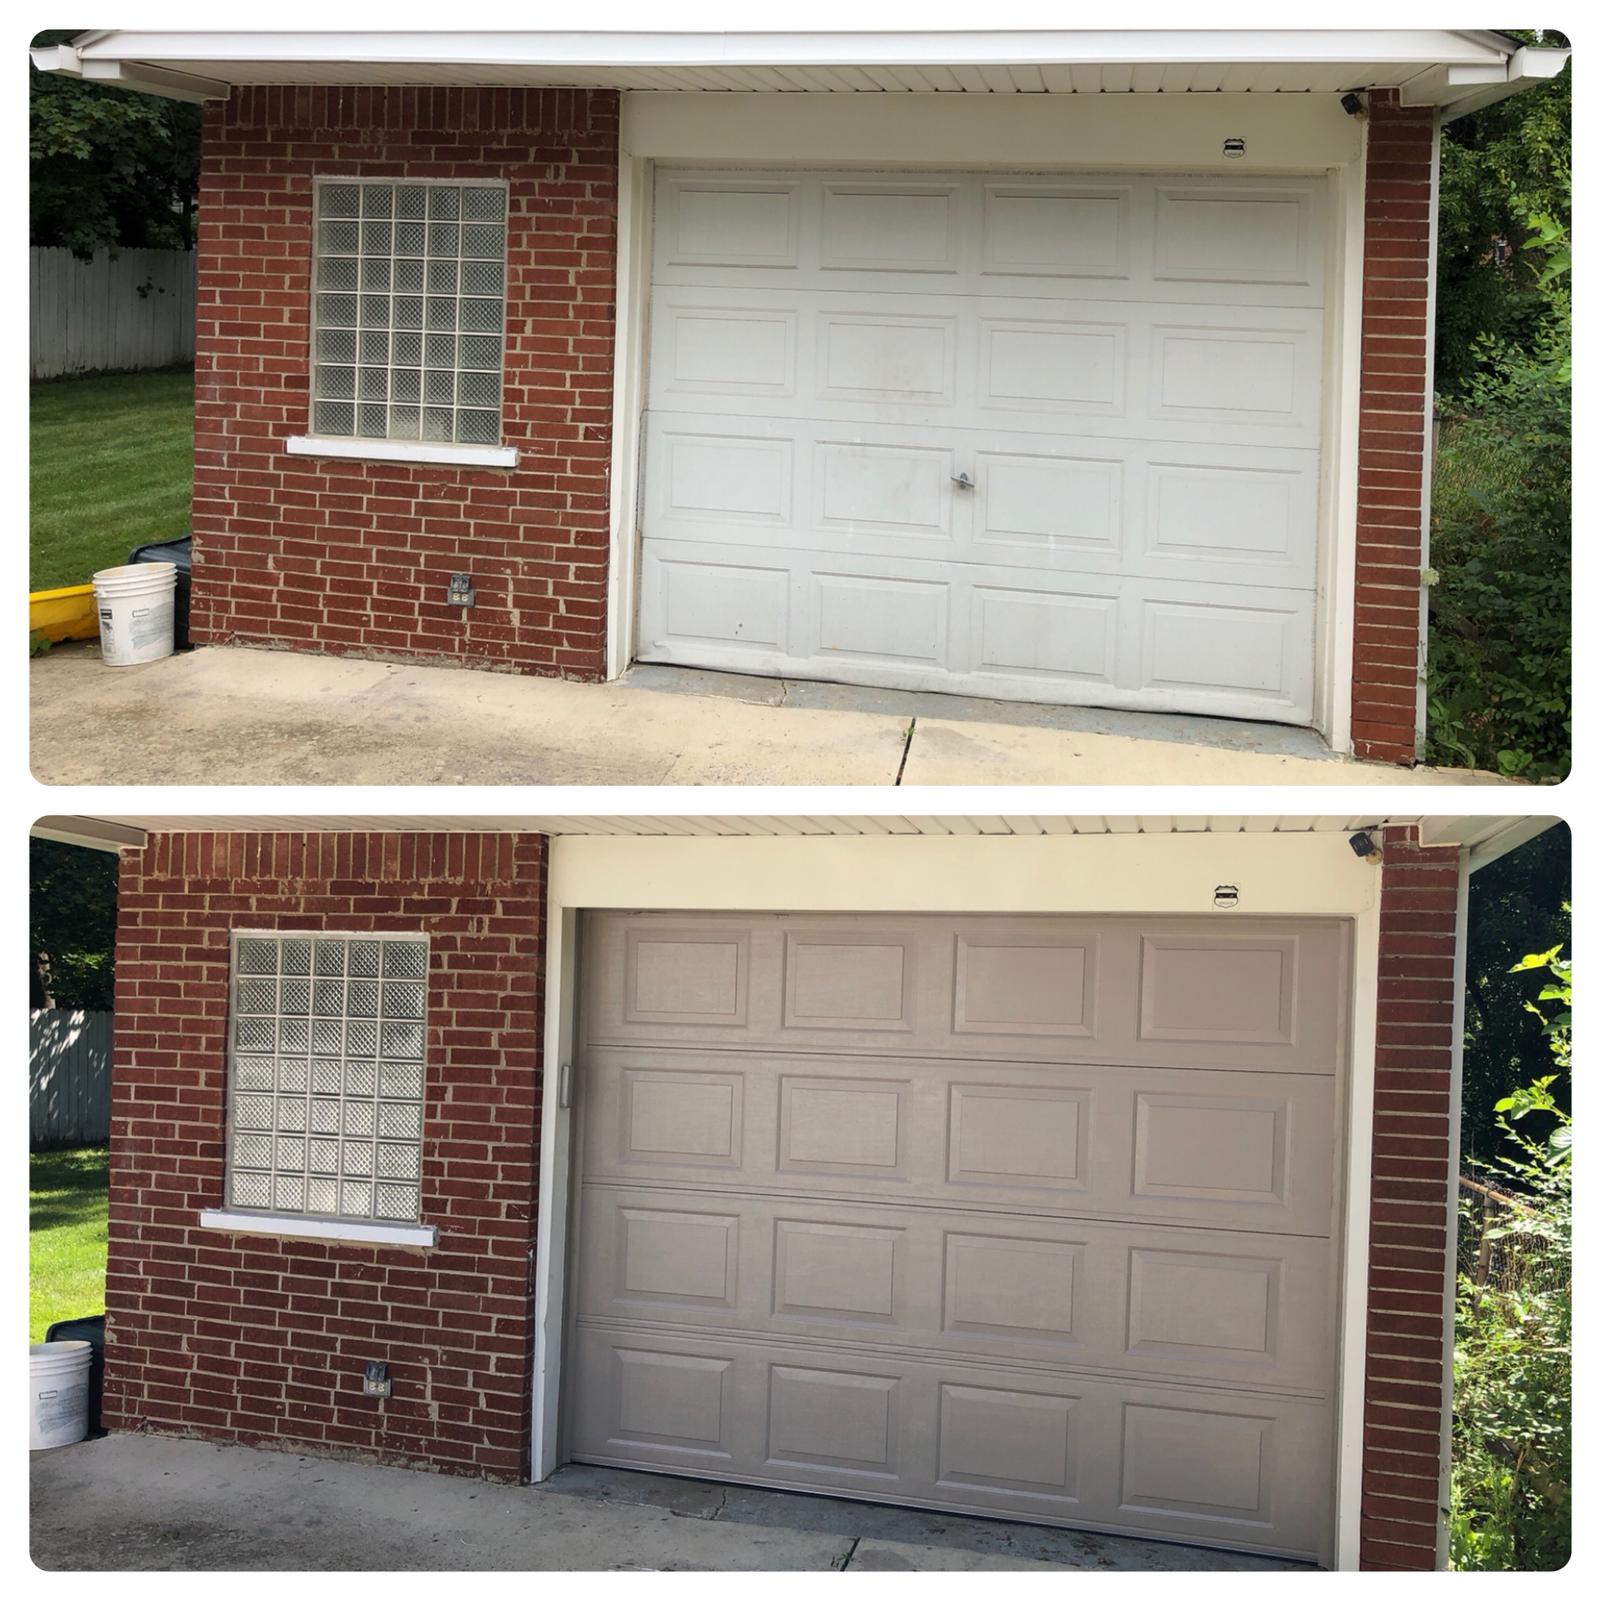 A brand new garage door will change the feel of your whole garage!